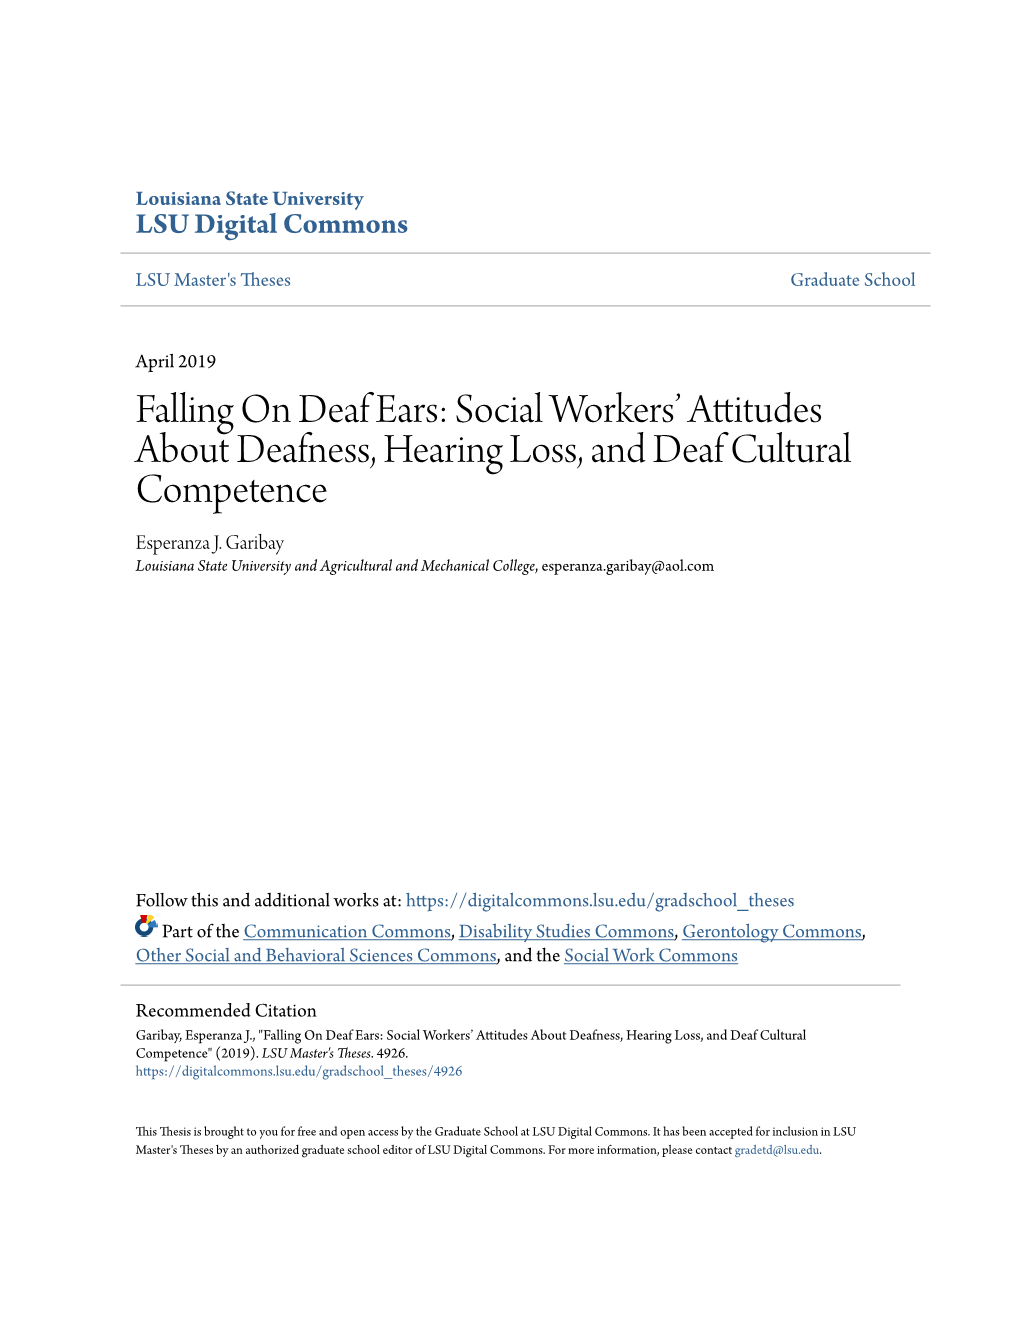 Falling on Deaf Ears: Social Workers' Attitudes About